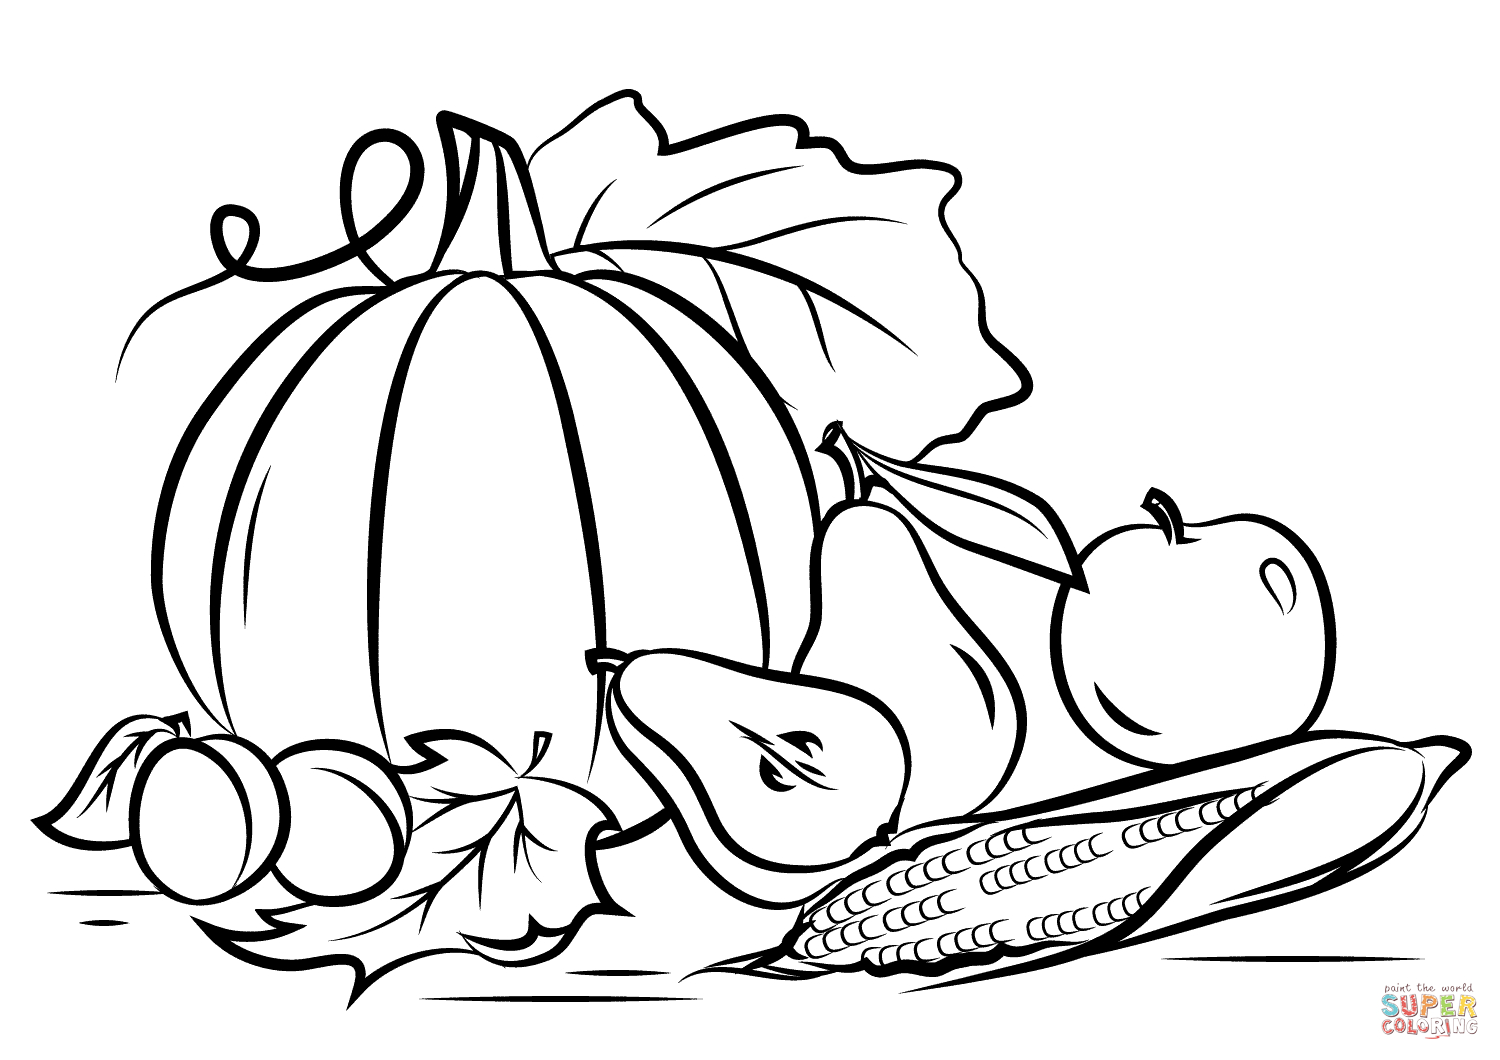 Autumn Harvest Coloring Page | Free Printable Coloring Pages - Free Printable Autumn Coloring Sheets